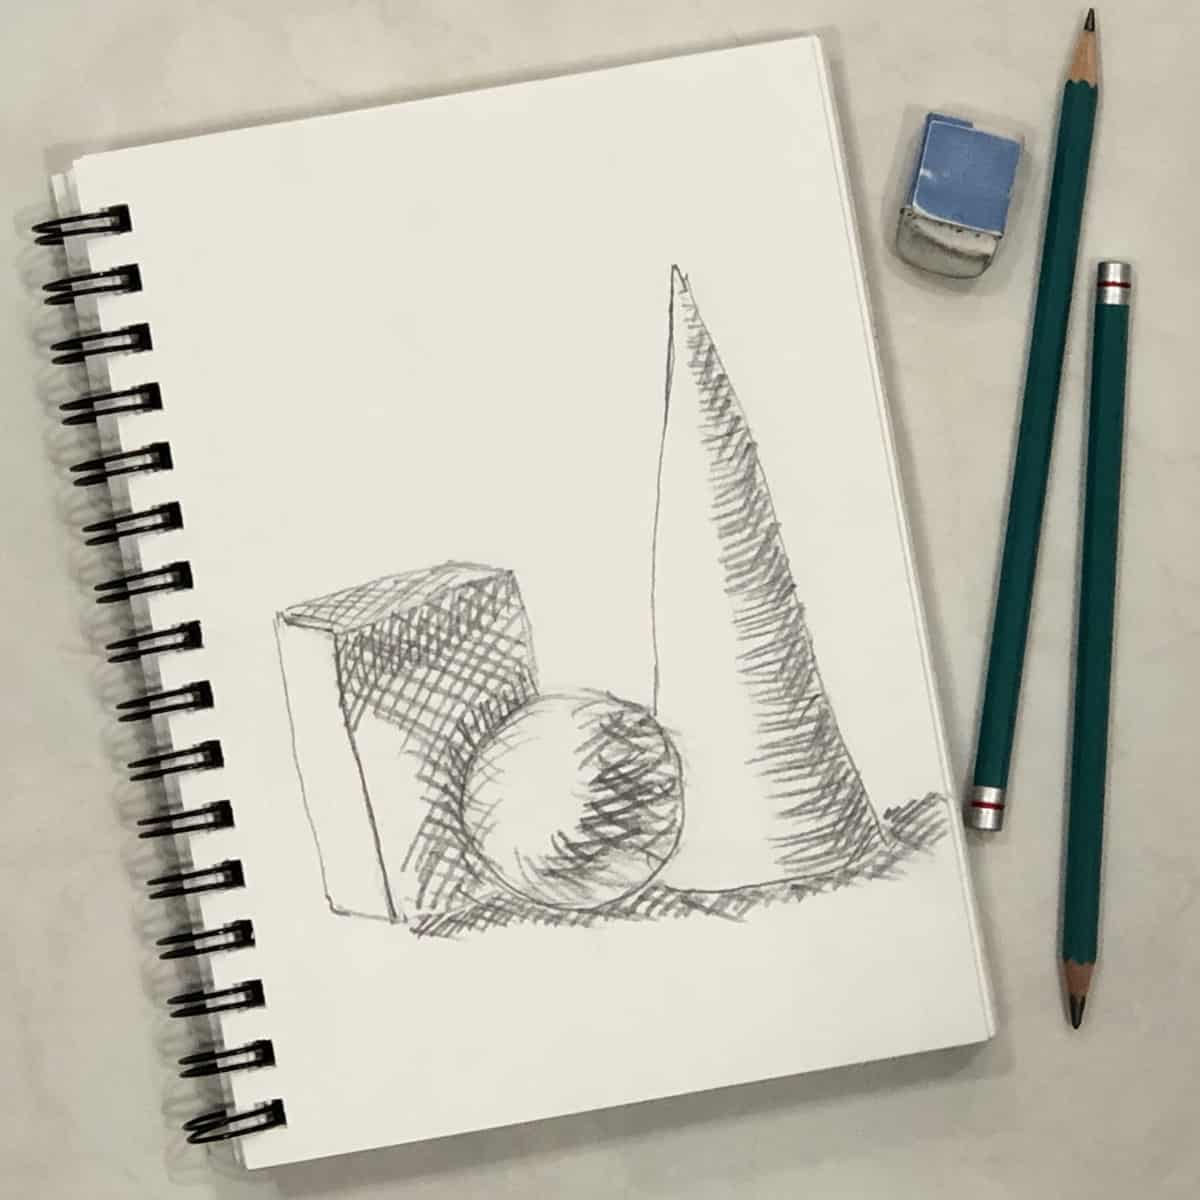 Cross hatched drawing of a cone, sphere, and box on a spiral ring sketchbook next to some drawing pencils and an eraser.